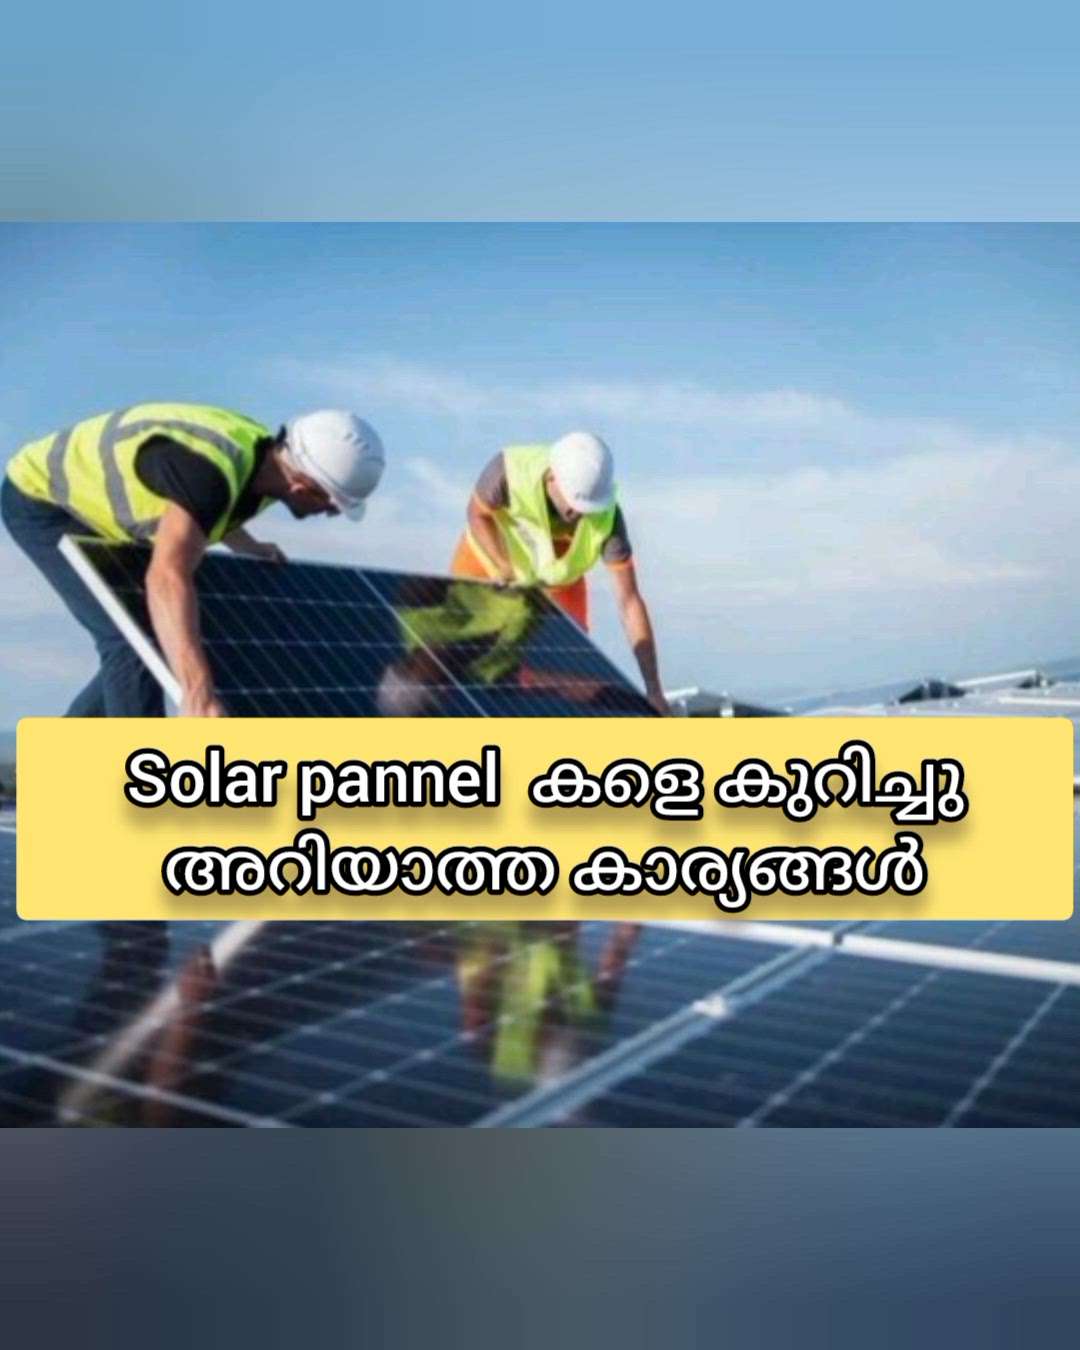 contact VRC Renewable Energies for more product inquiries and services
.
.
.
https://koloapp.in/call/04954265676
 #creatorsofkolo  #Kasargod  #vrcrenewables  #vrcrenewableenergies  #vrc  #solarinstallation  #solarpanels  #microinverter  #microinverterbased  #onegridmicroinverter #renewables  #microinverter